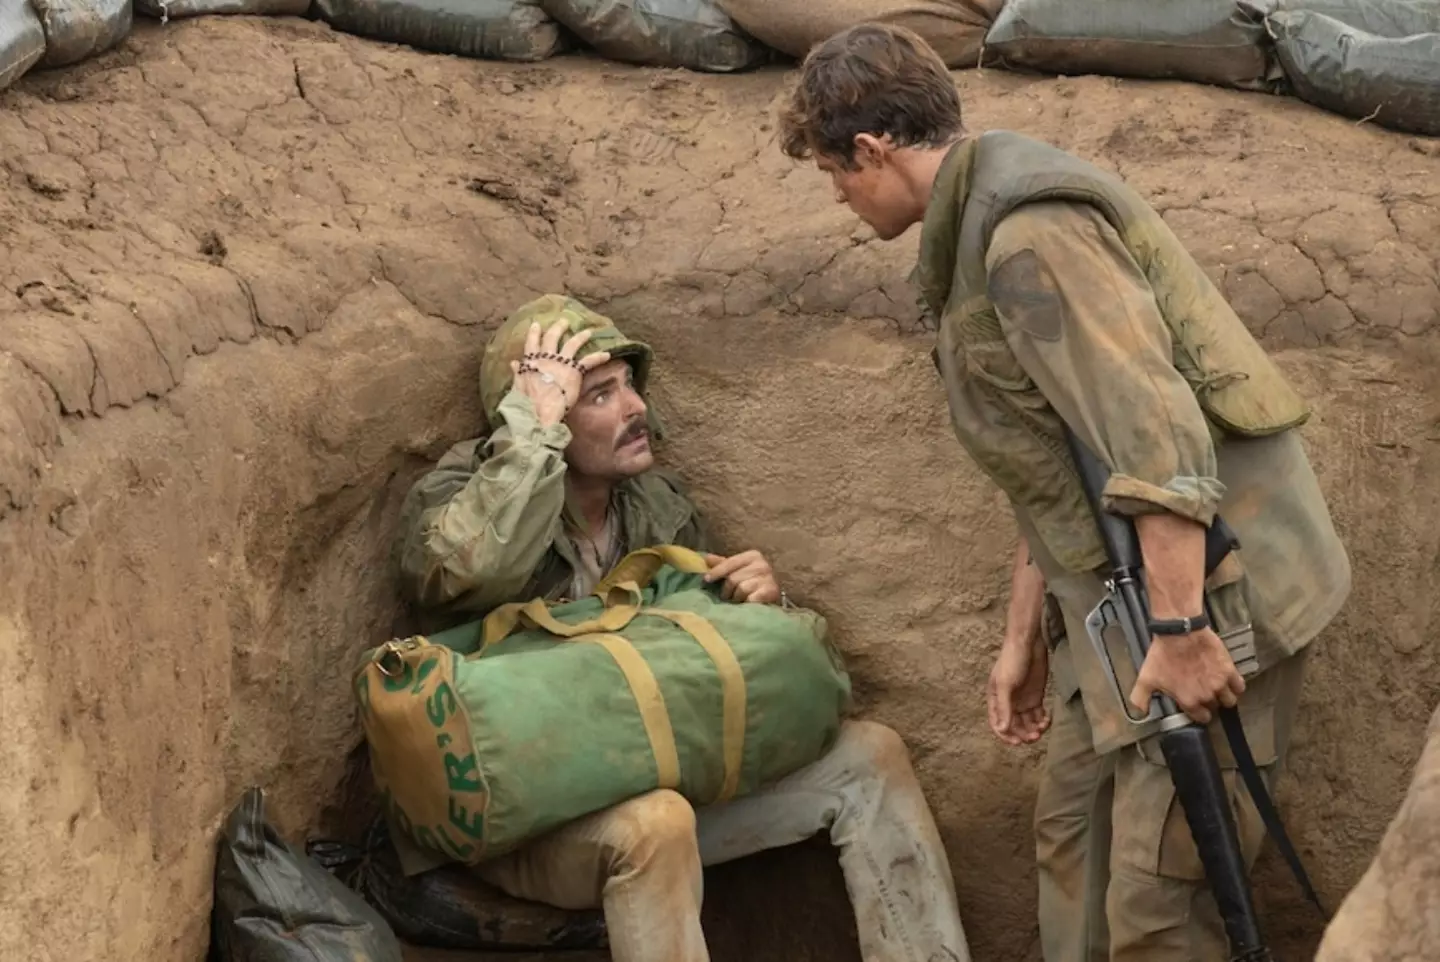 Efron says a scene he filmed in the trench will stay with him forever.